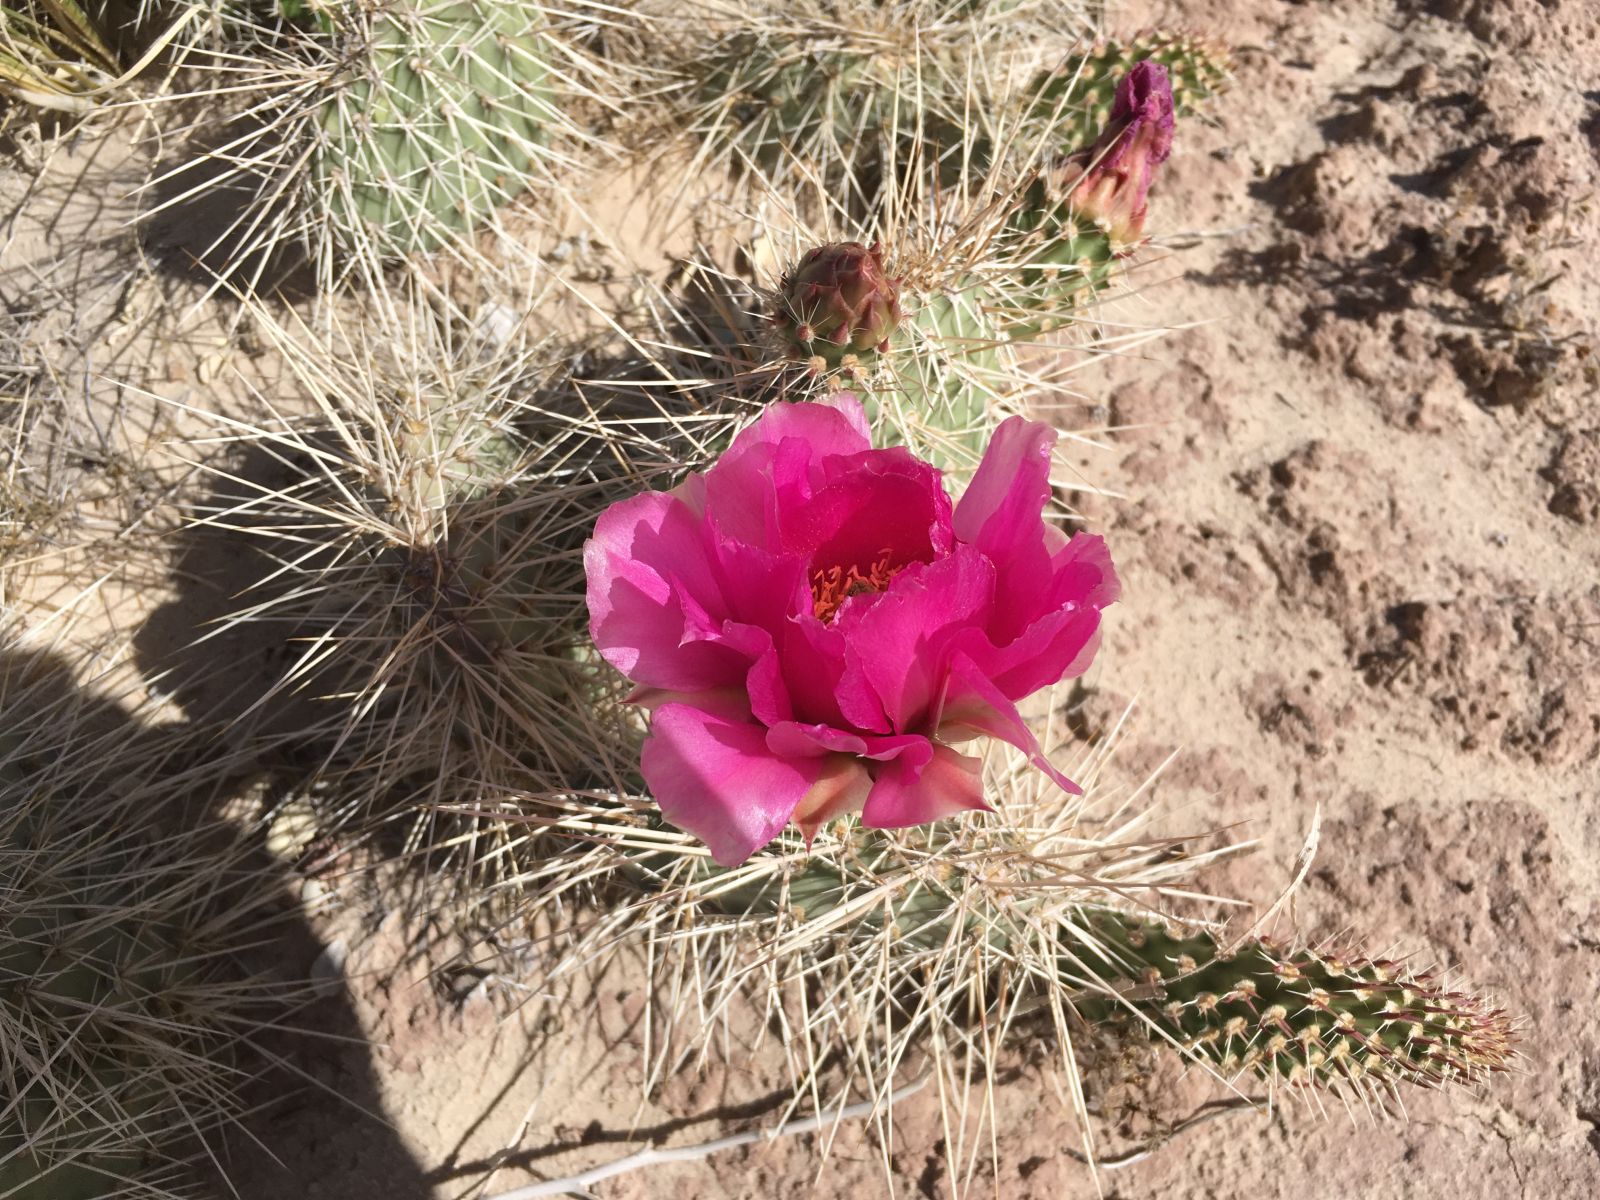 Cactus flower, Cathedral Valley.